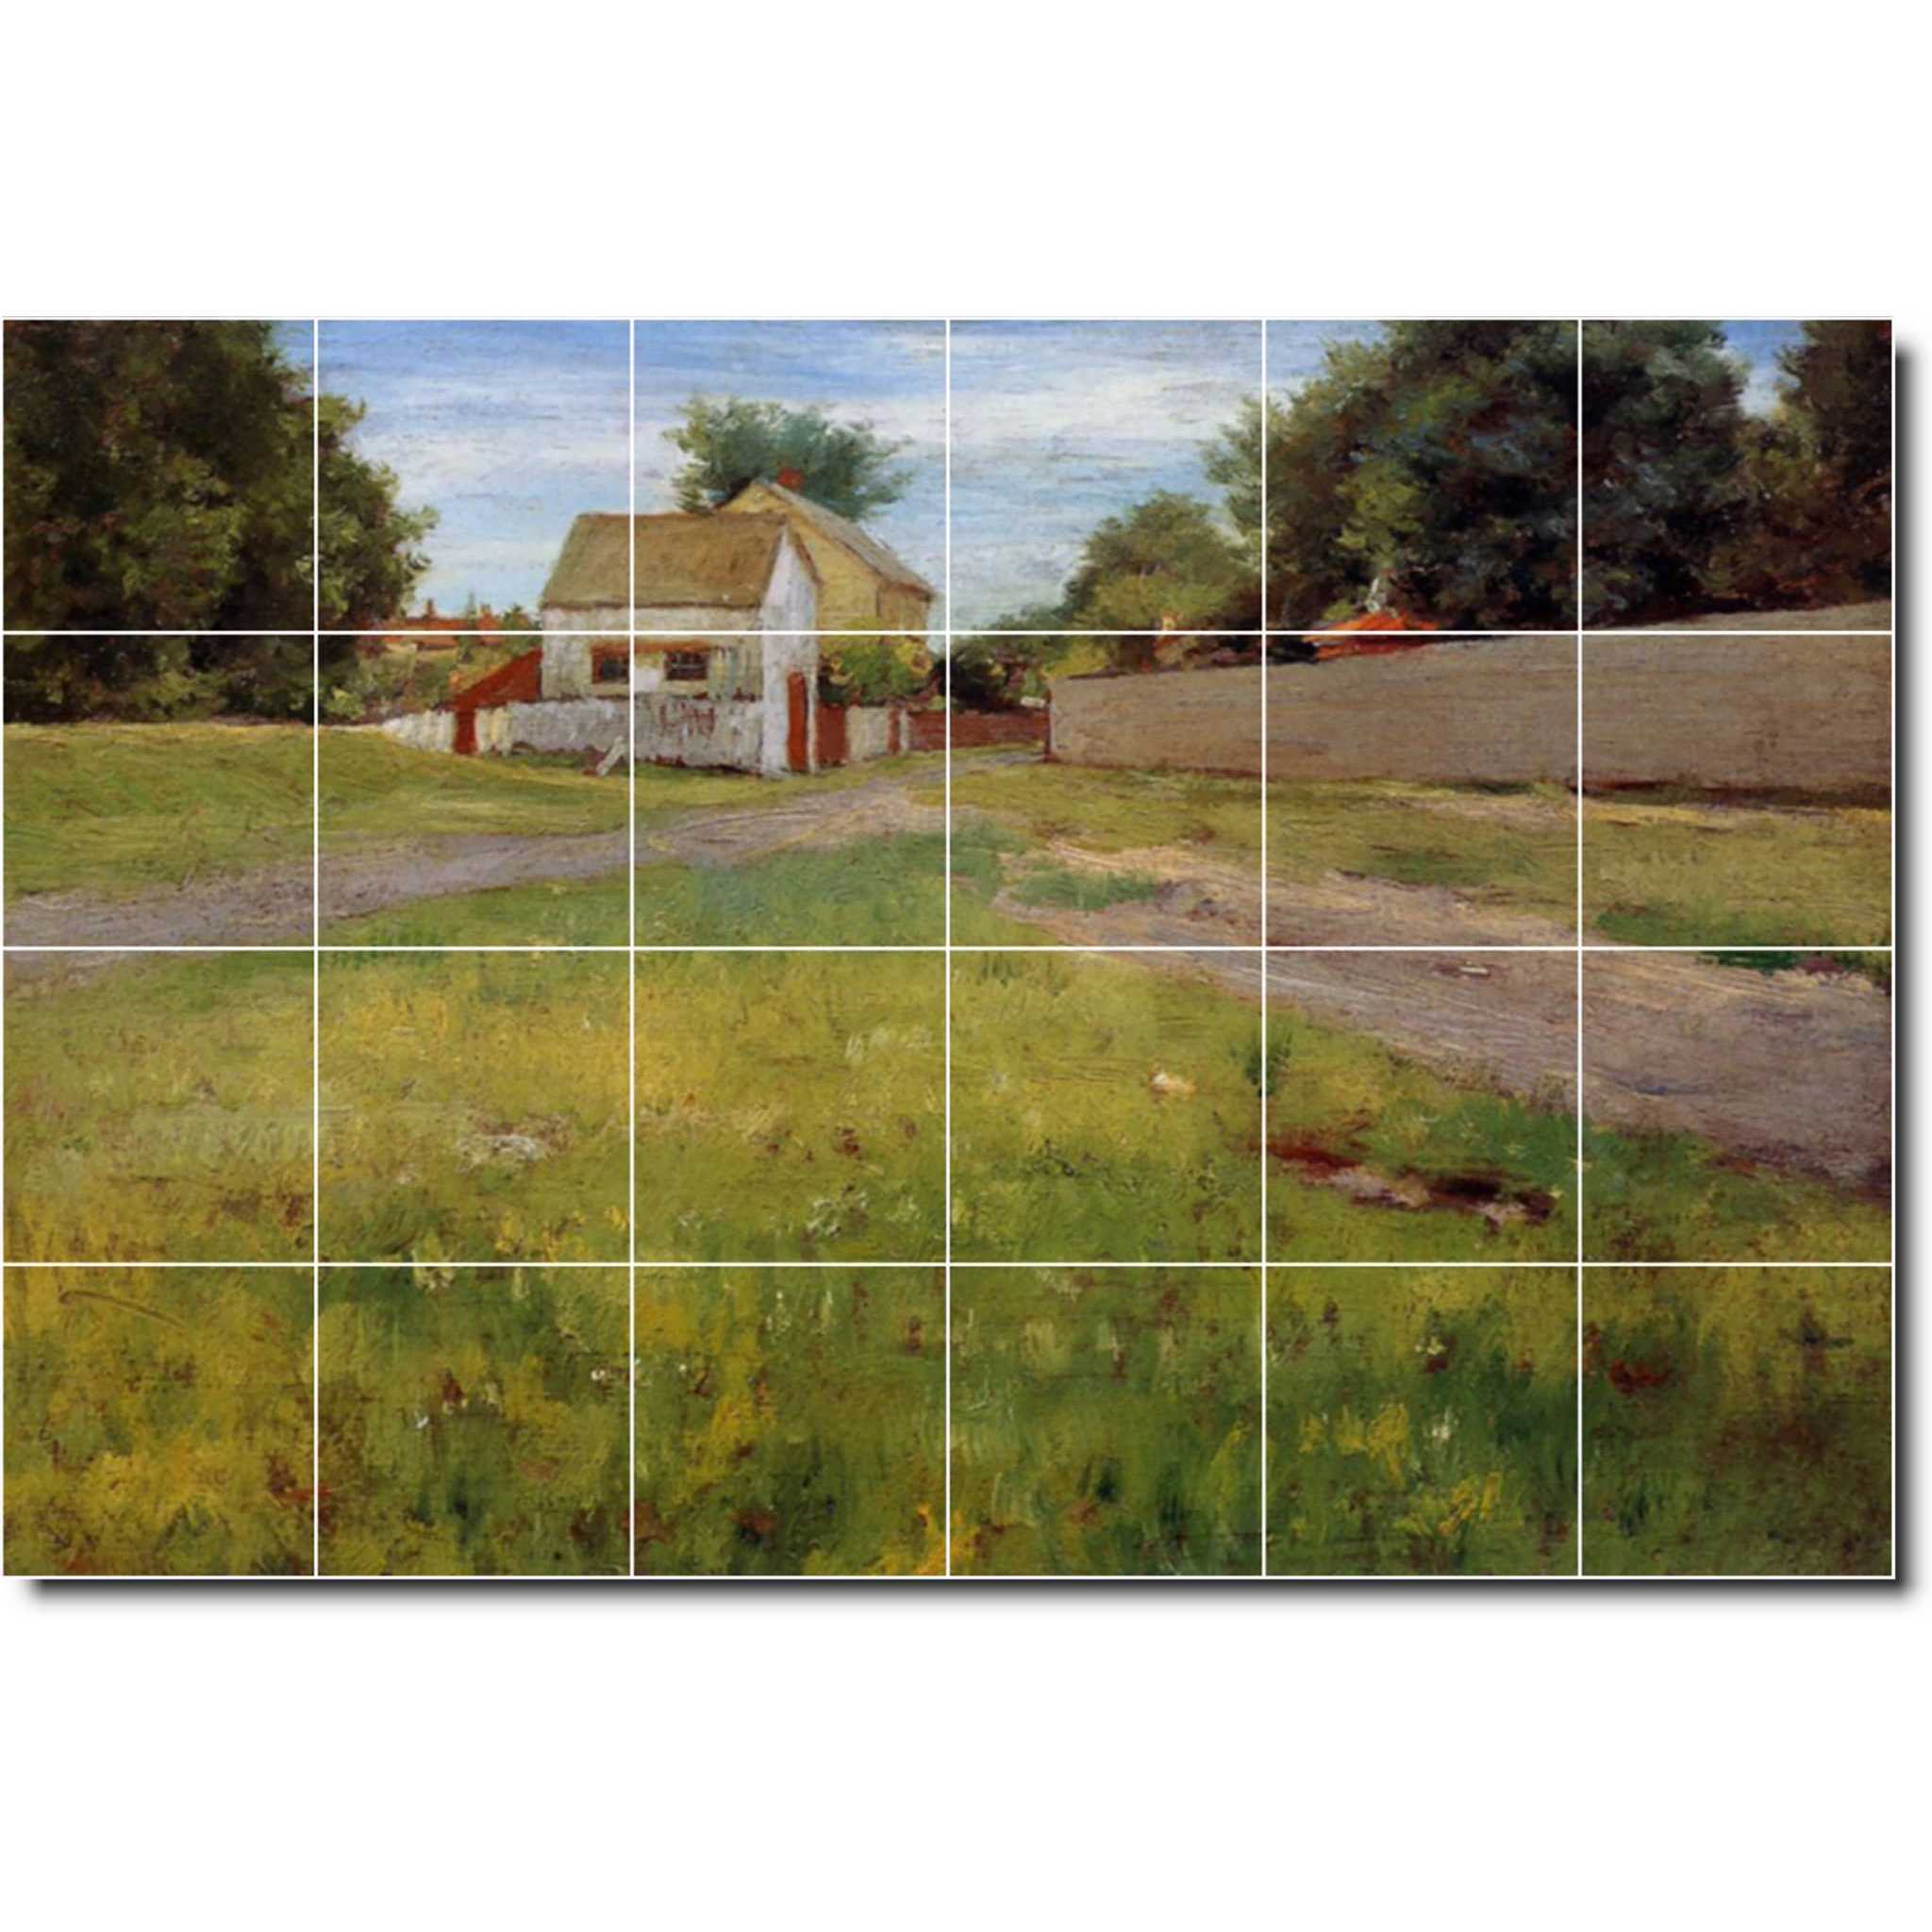 william chase country painting ceramic tile mural p01498